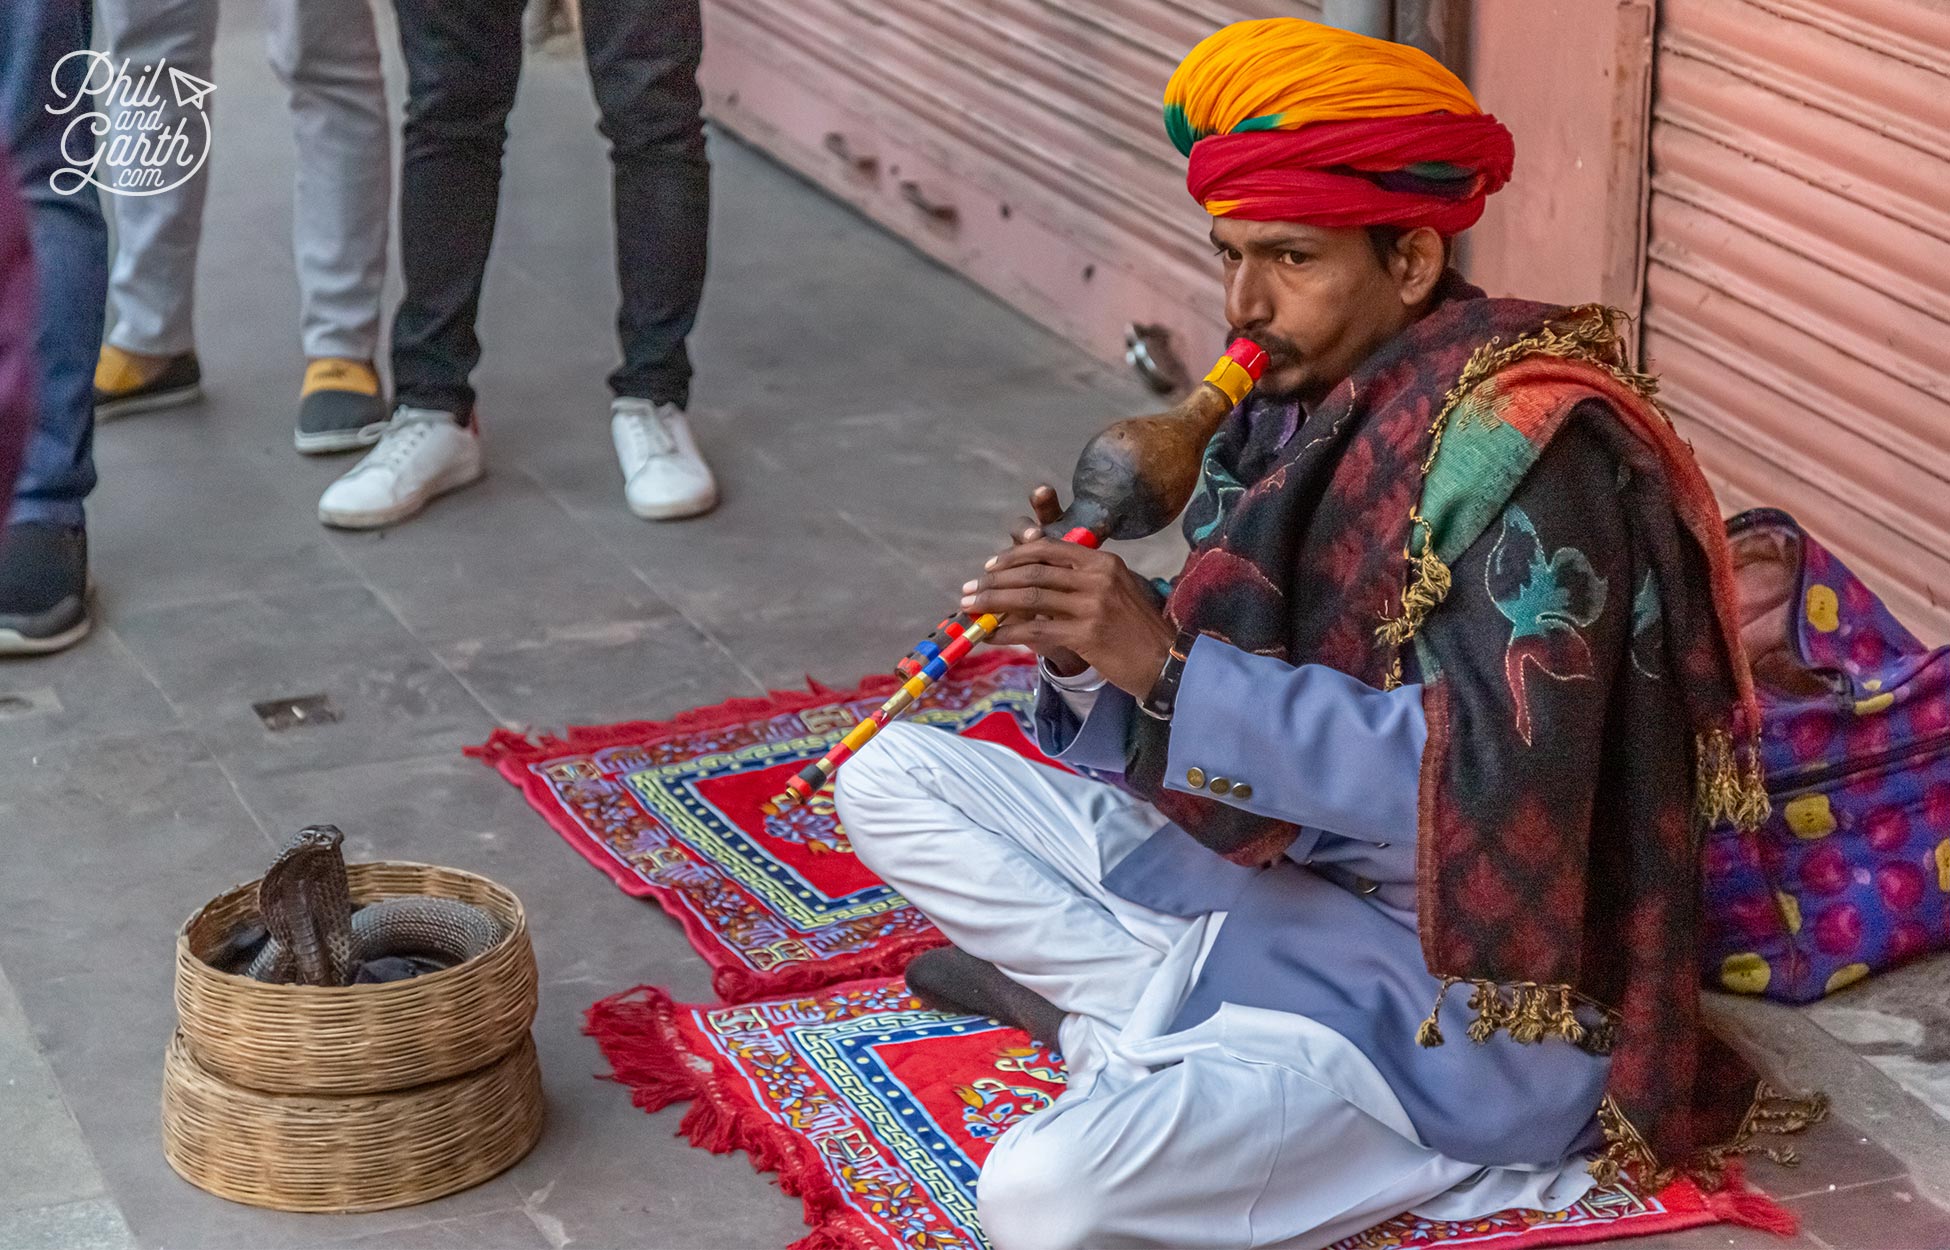 Outside Hawa Mahal are loads of hawkers, including snake charmers!